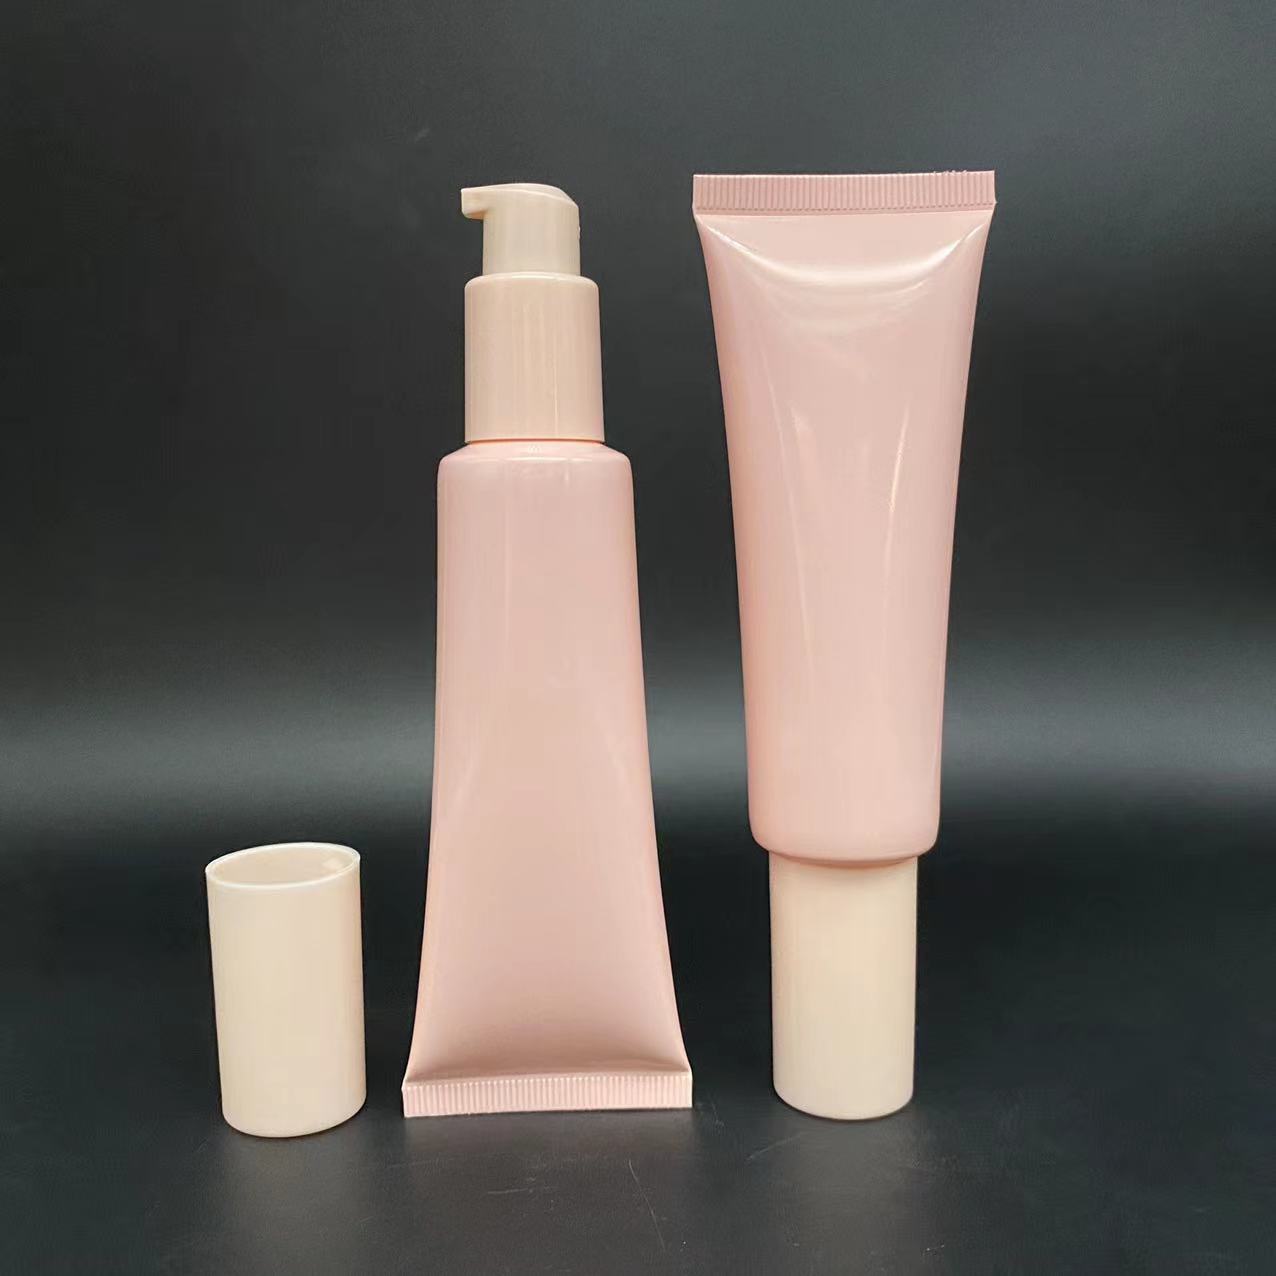 20g-50g airless pump cosmetic tubes